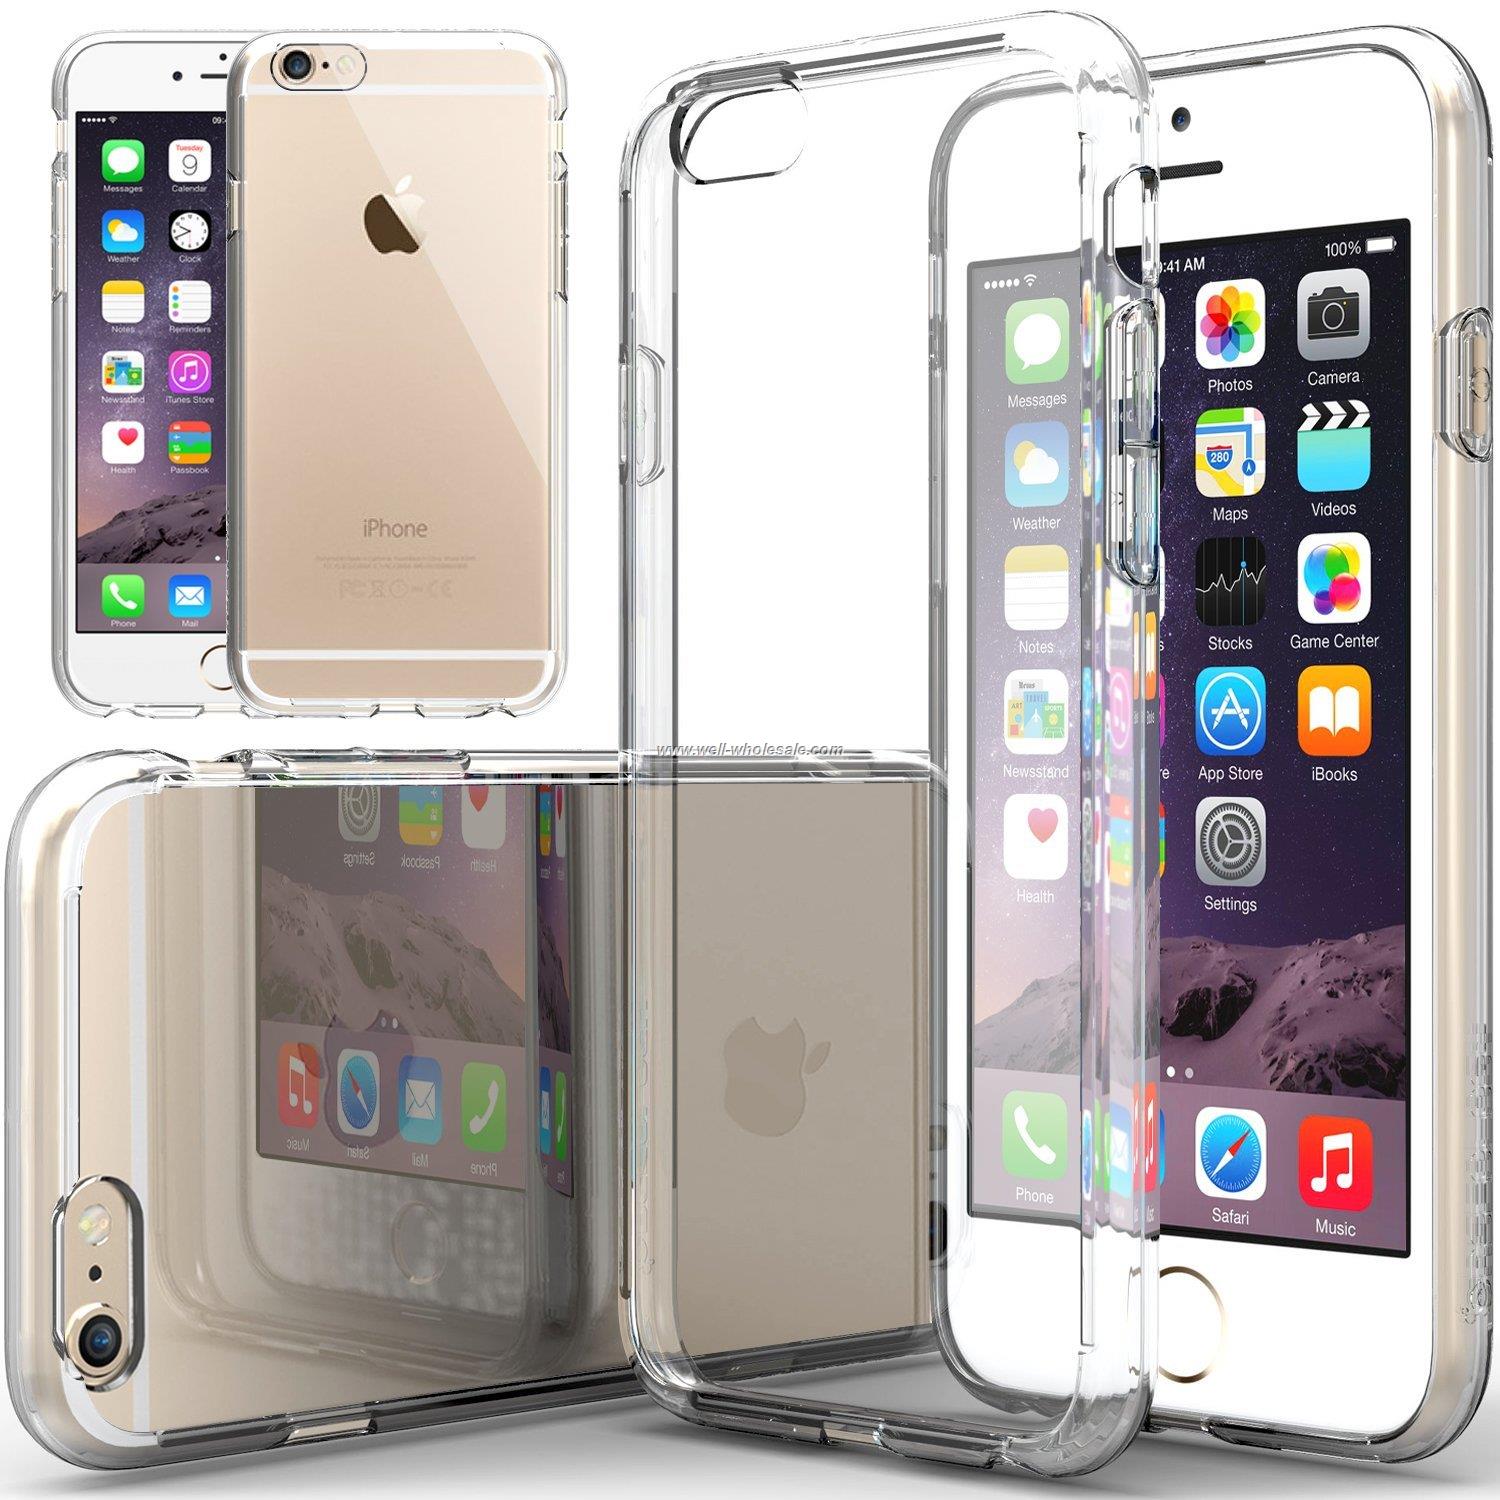 TPU case for apple iPhone 6,for iPhone 6 case,for iPhone6 case